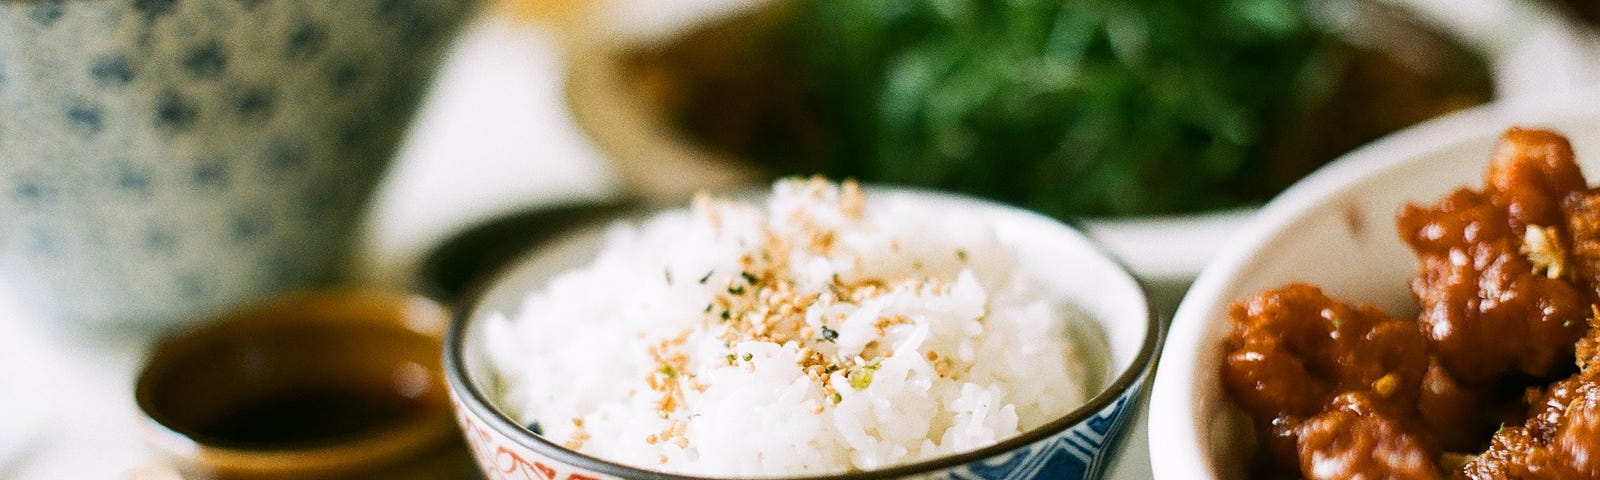 A delicious bowl of rice waits on the table to eat mindfully.